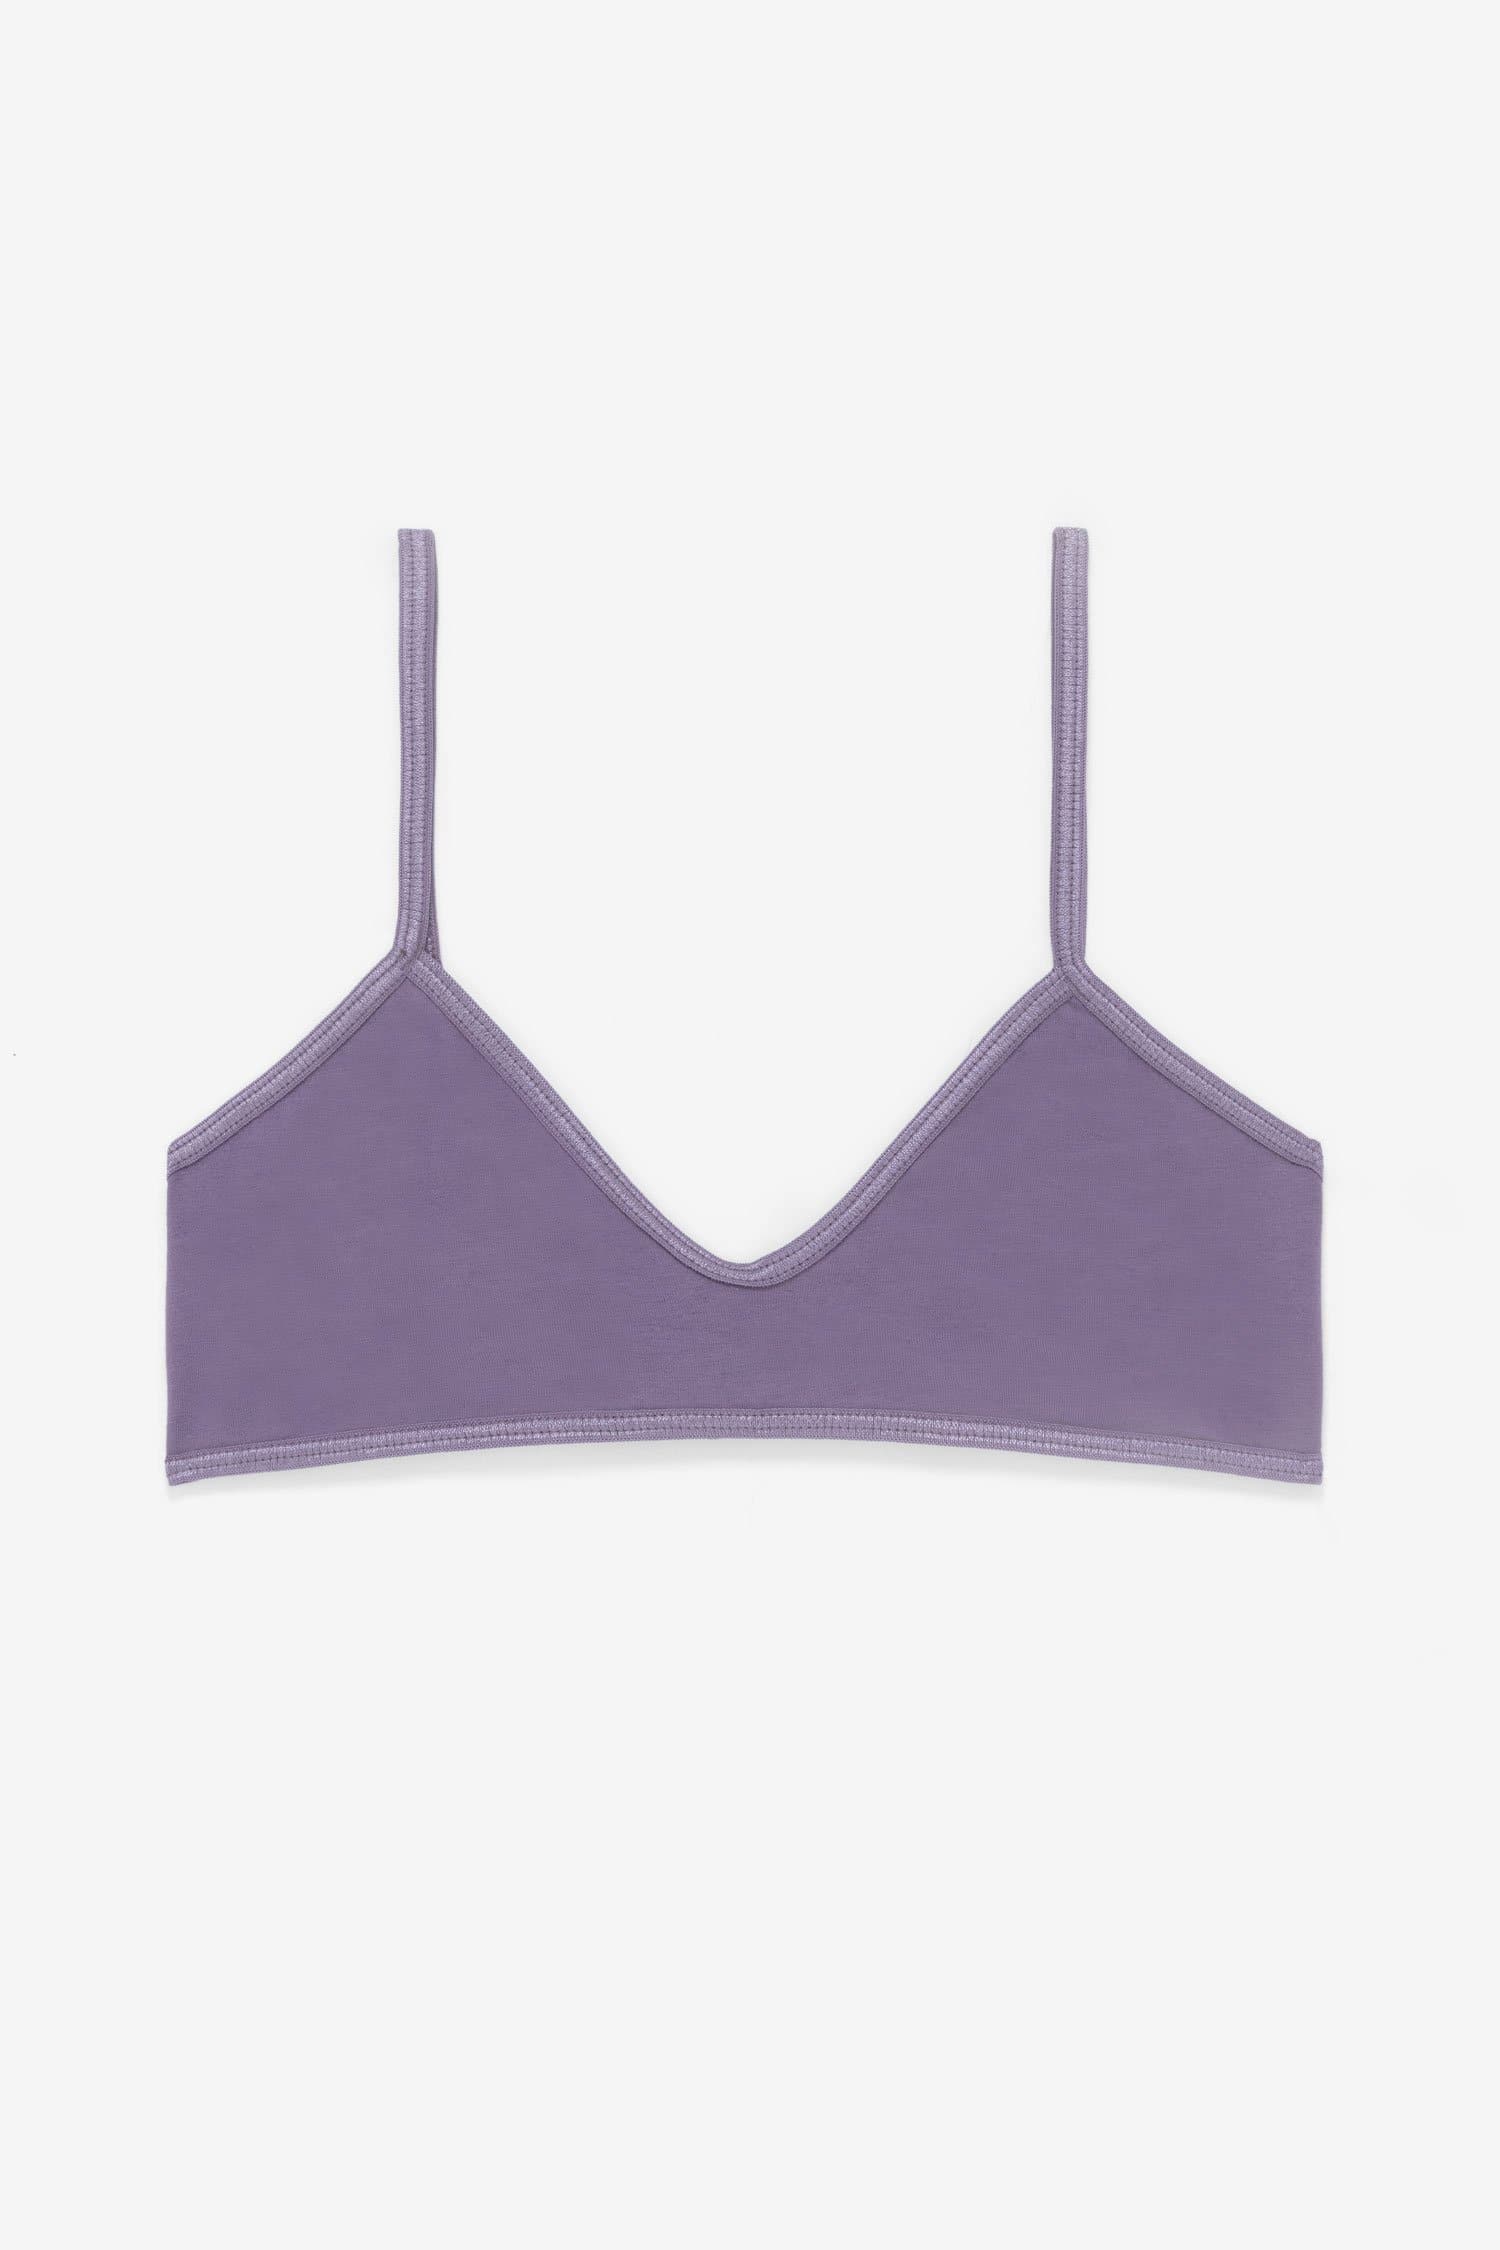 Youmita Waffle Weave Bralette - Busted Bra Shop